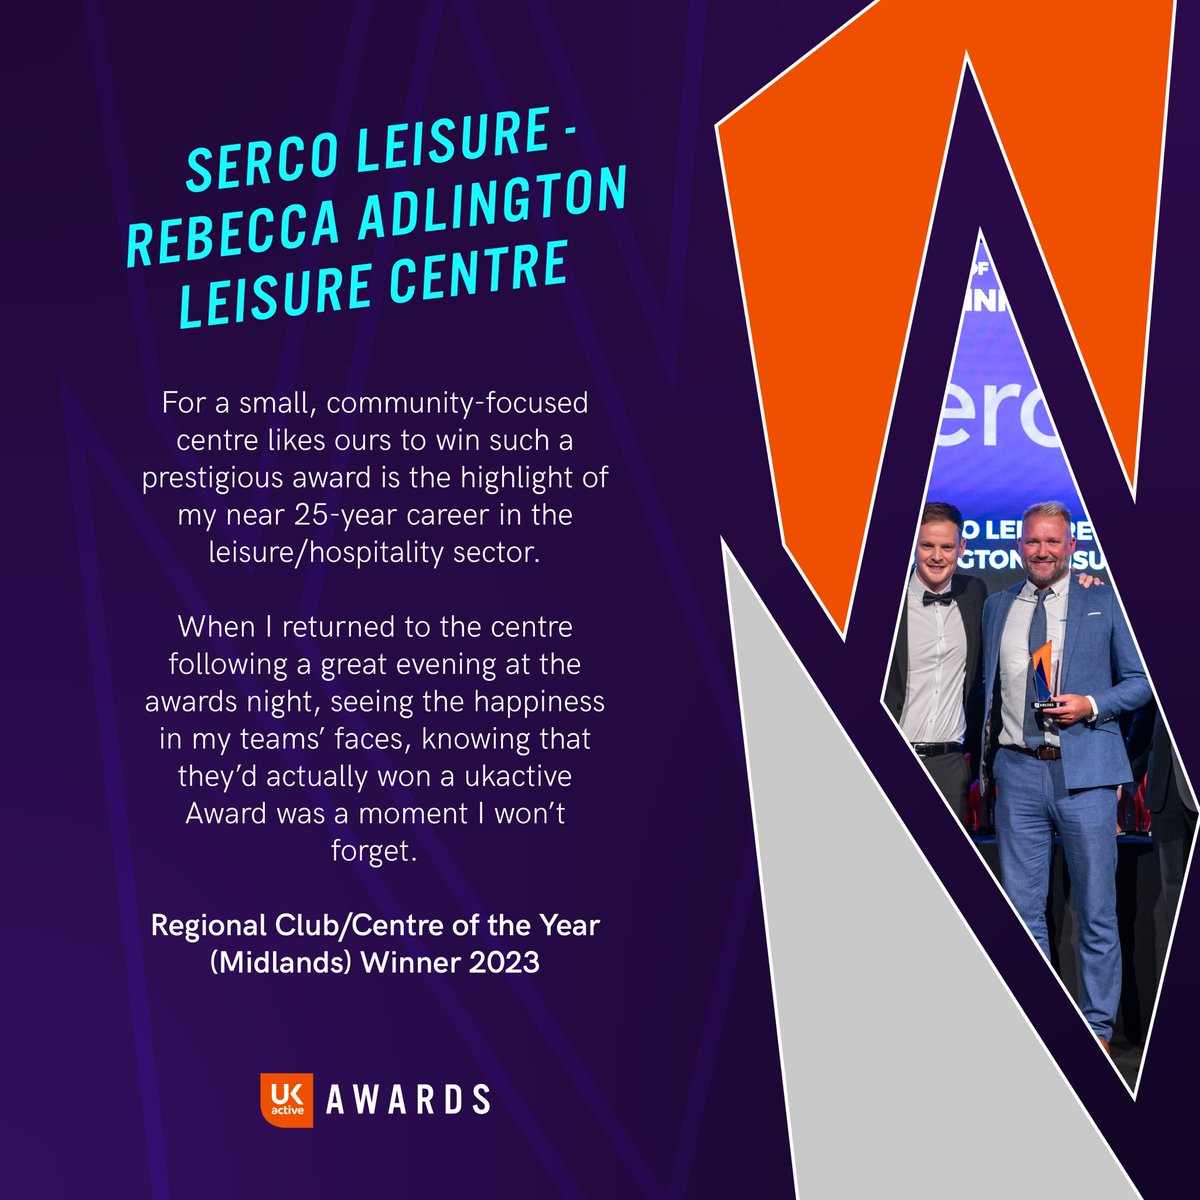 The entry process for the 2024 ukactive Awards has begun! Here's what last year's winner of the Midlands Regional Club/Centre of the Year Award from Serco Serco Leisure's More Leisure Community Trust had to say. Enter here: ukactive.com/ukactive-award… #ukactiveAwards